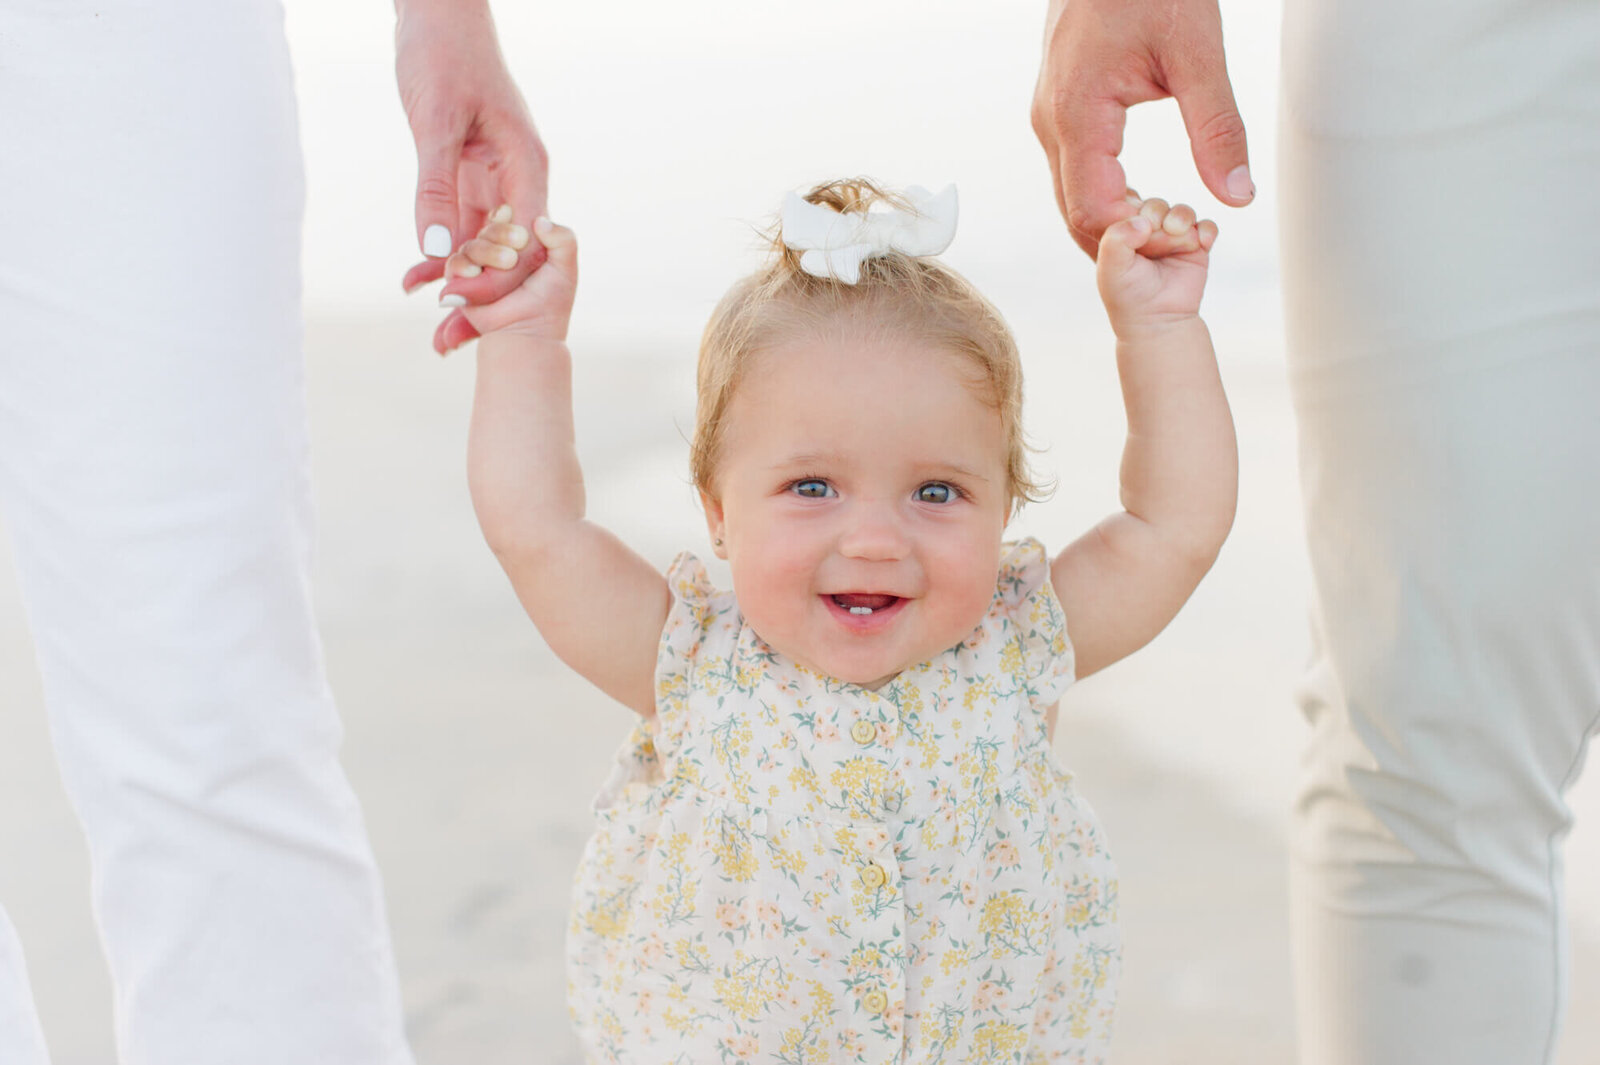 Young daughter holding both parents hands smiling at the camera during their family photo session